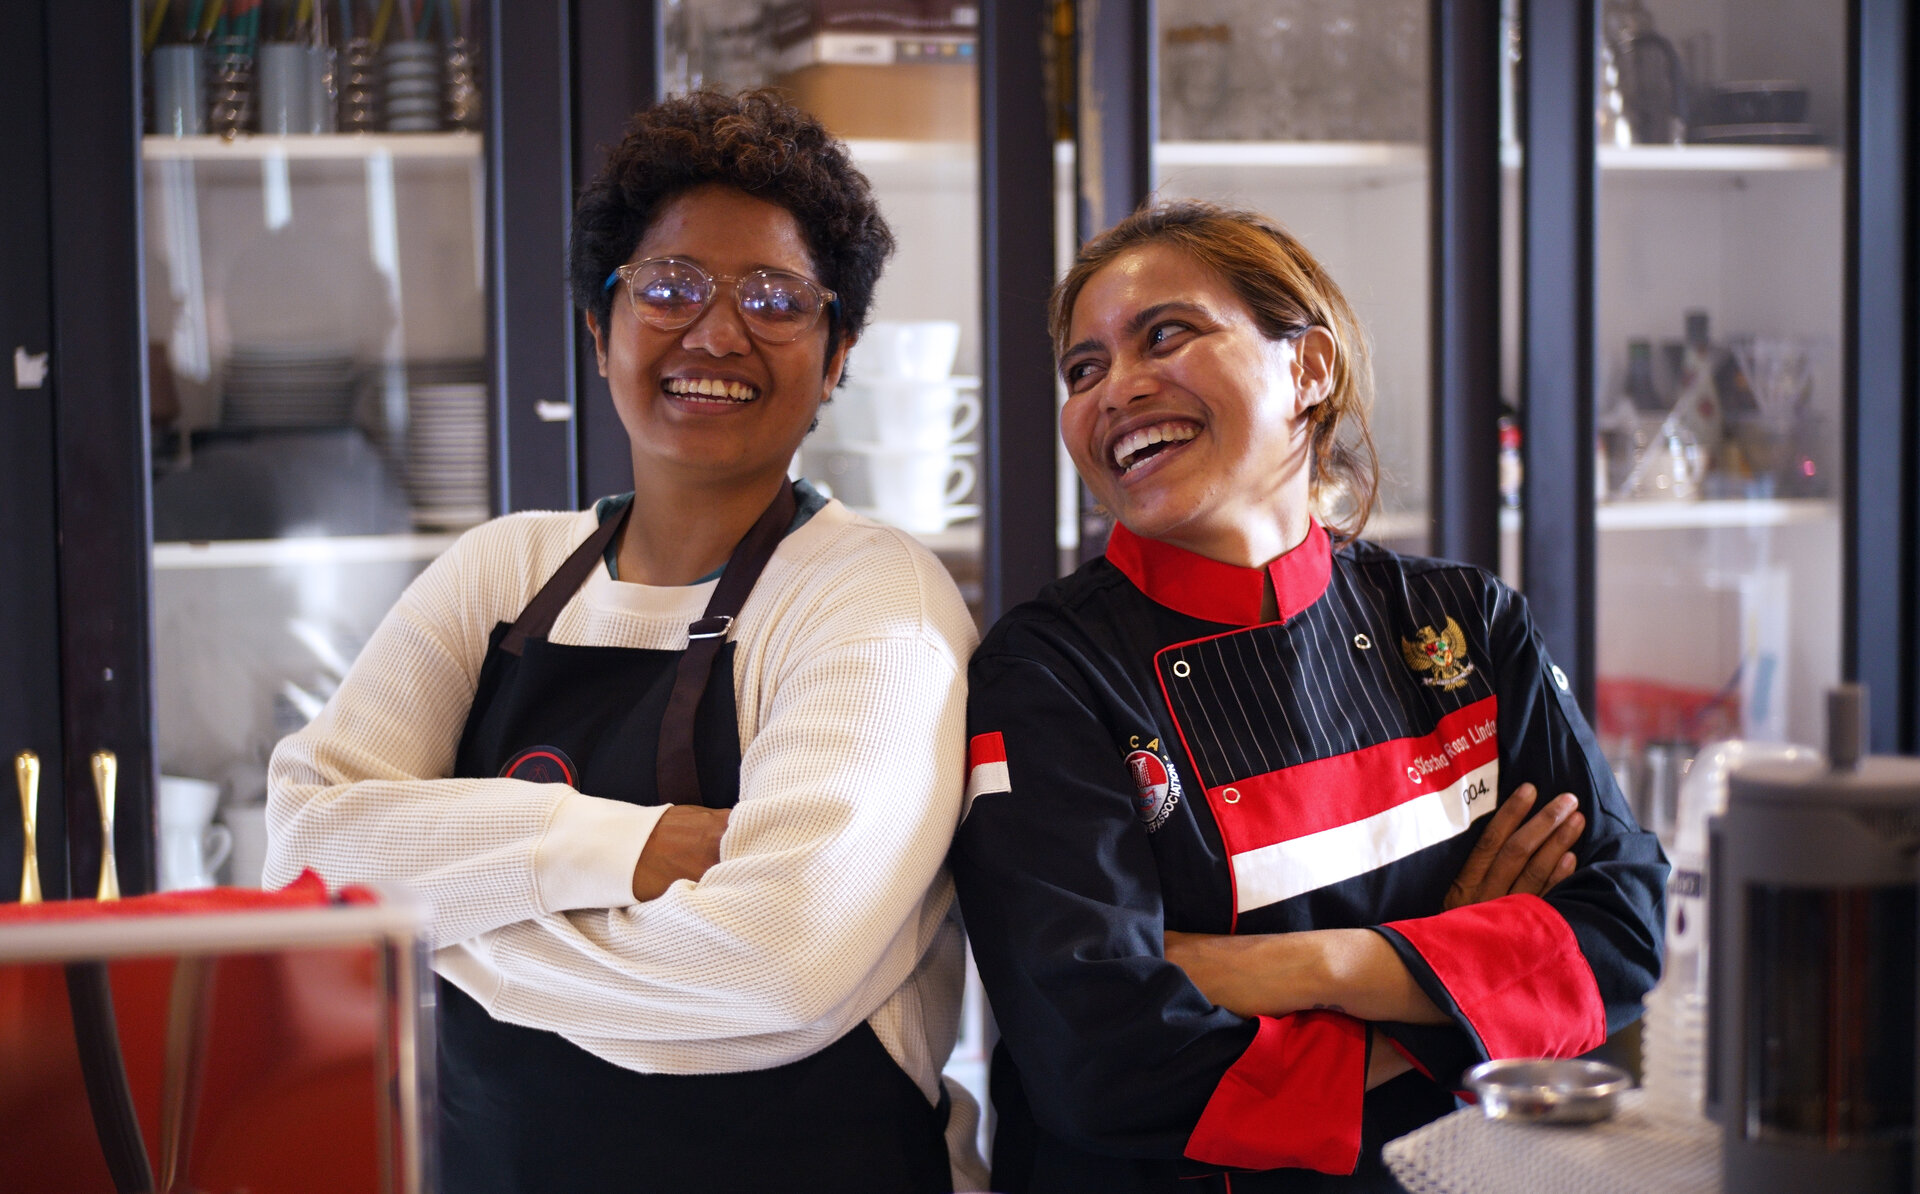 Kopi Saa/Cafe Inklusi co-founders: Kichi Jacob (left) in the CafeIn barista apron and Sischa Solokana in the Indonesian Chef Association uniform.